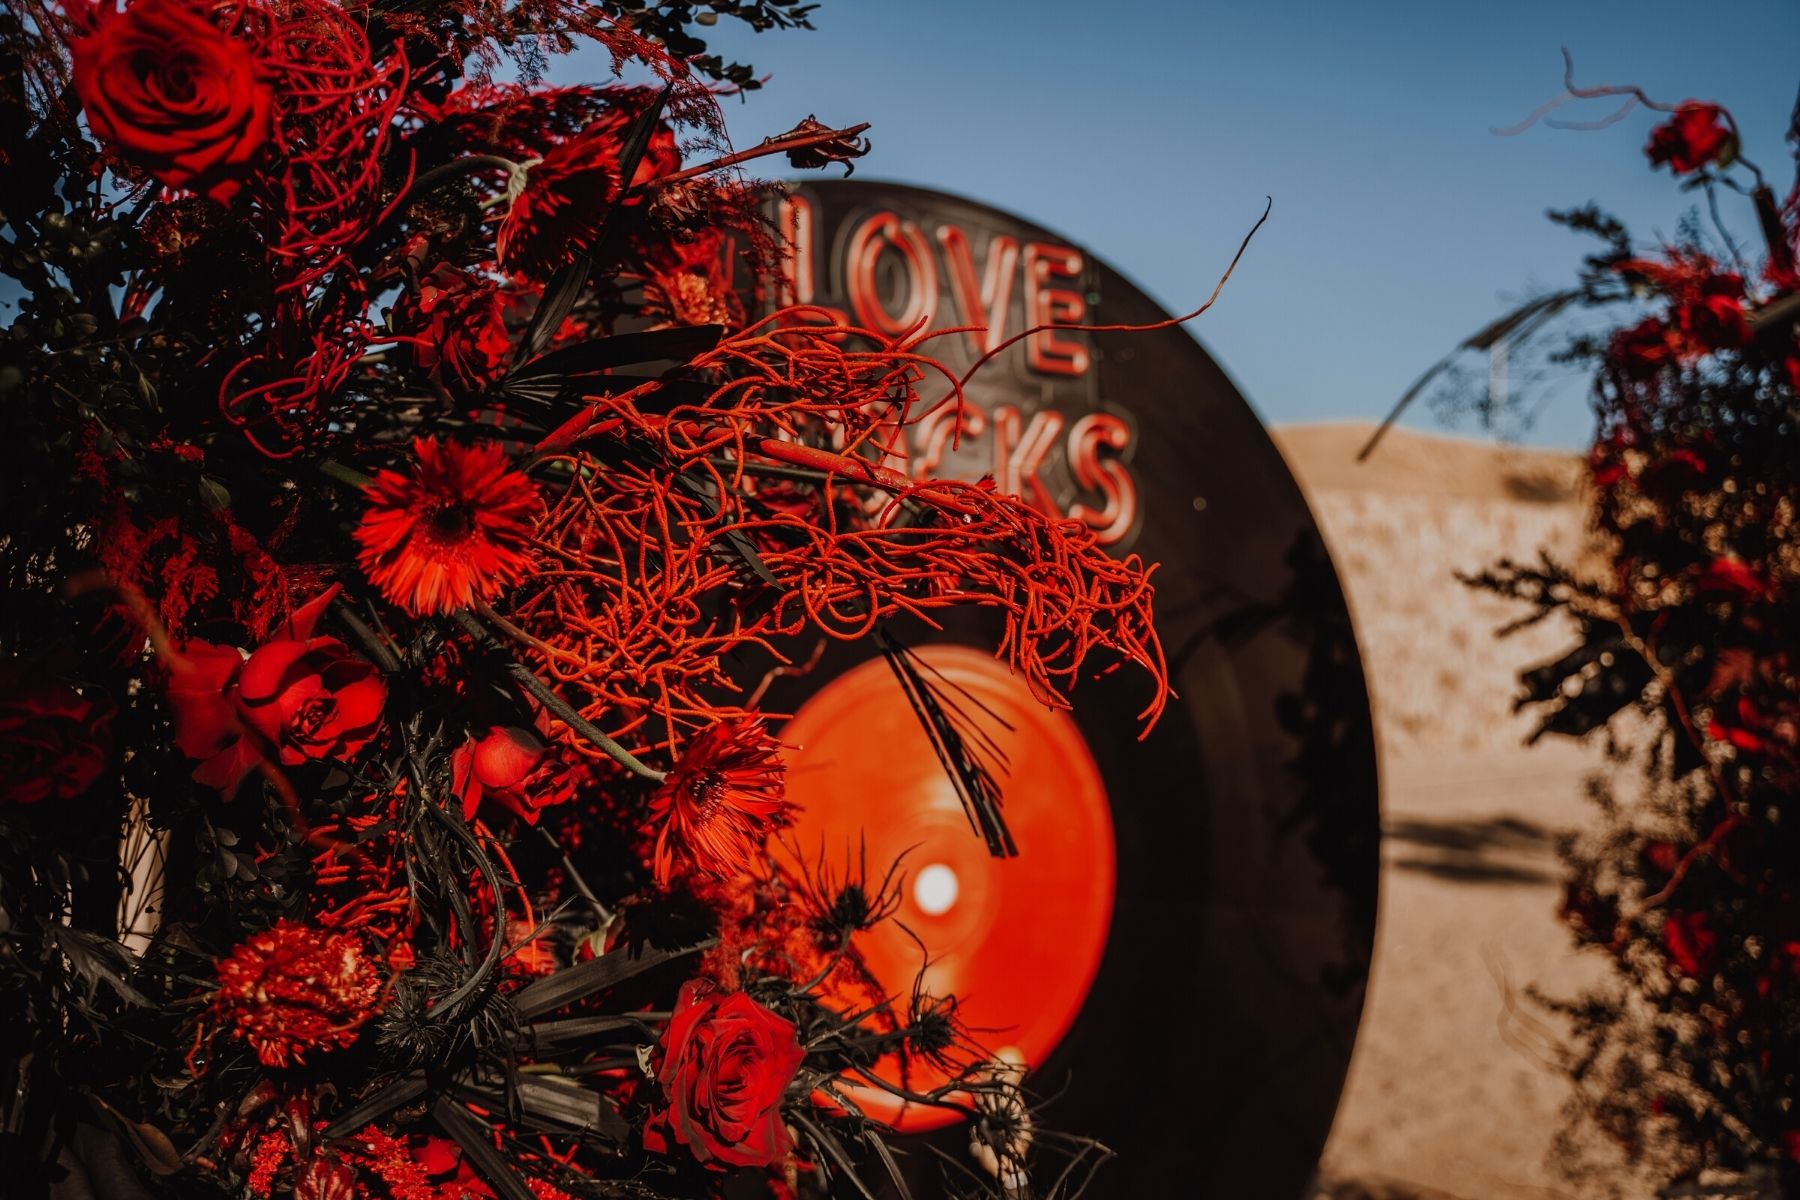 Love Rocks - An Event with a rock and roll mood, full of romance with red flowers - Yamile Bulos for Del Cabo Event / Aria Vera Floral on Thursd